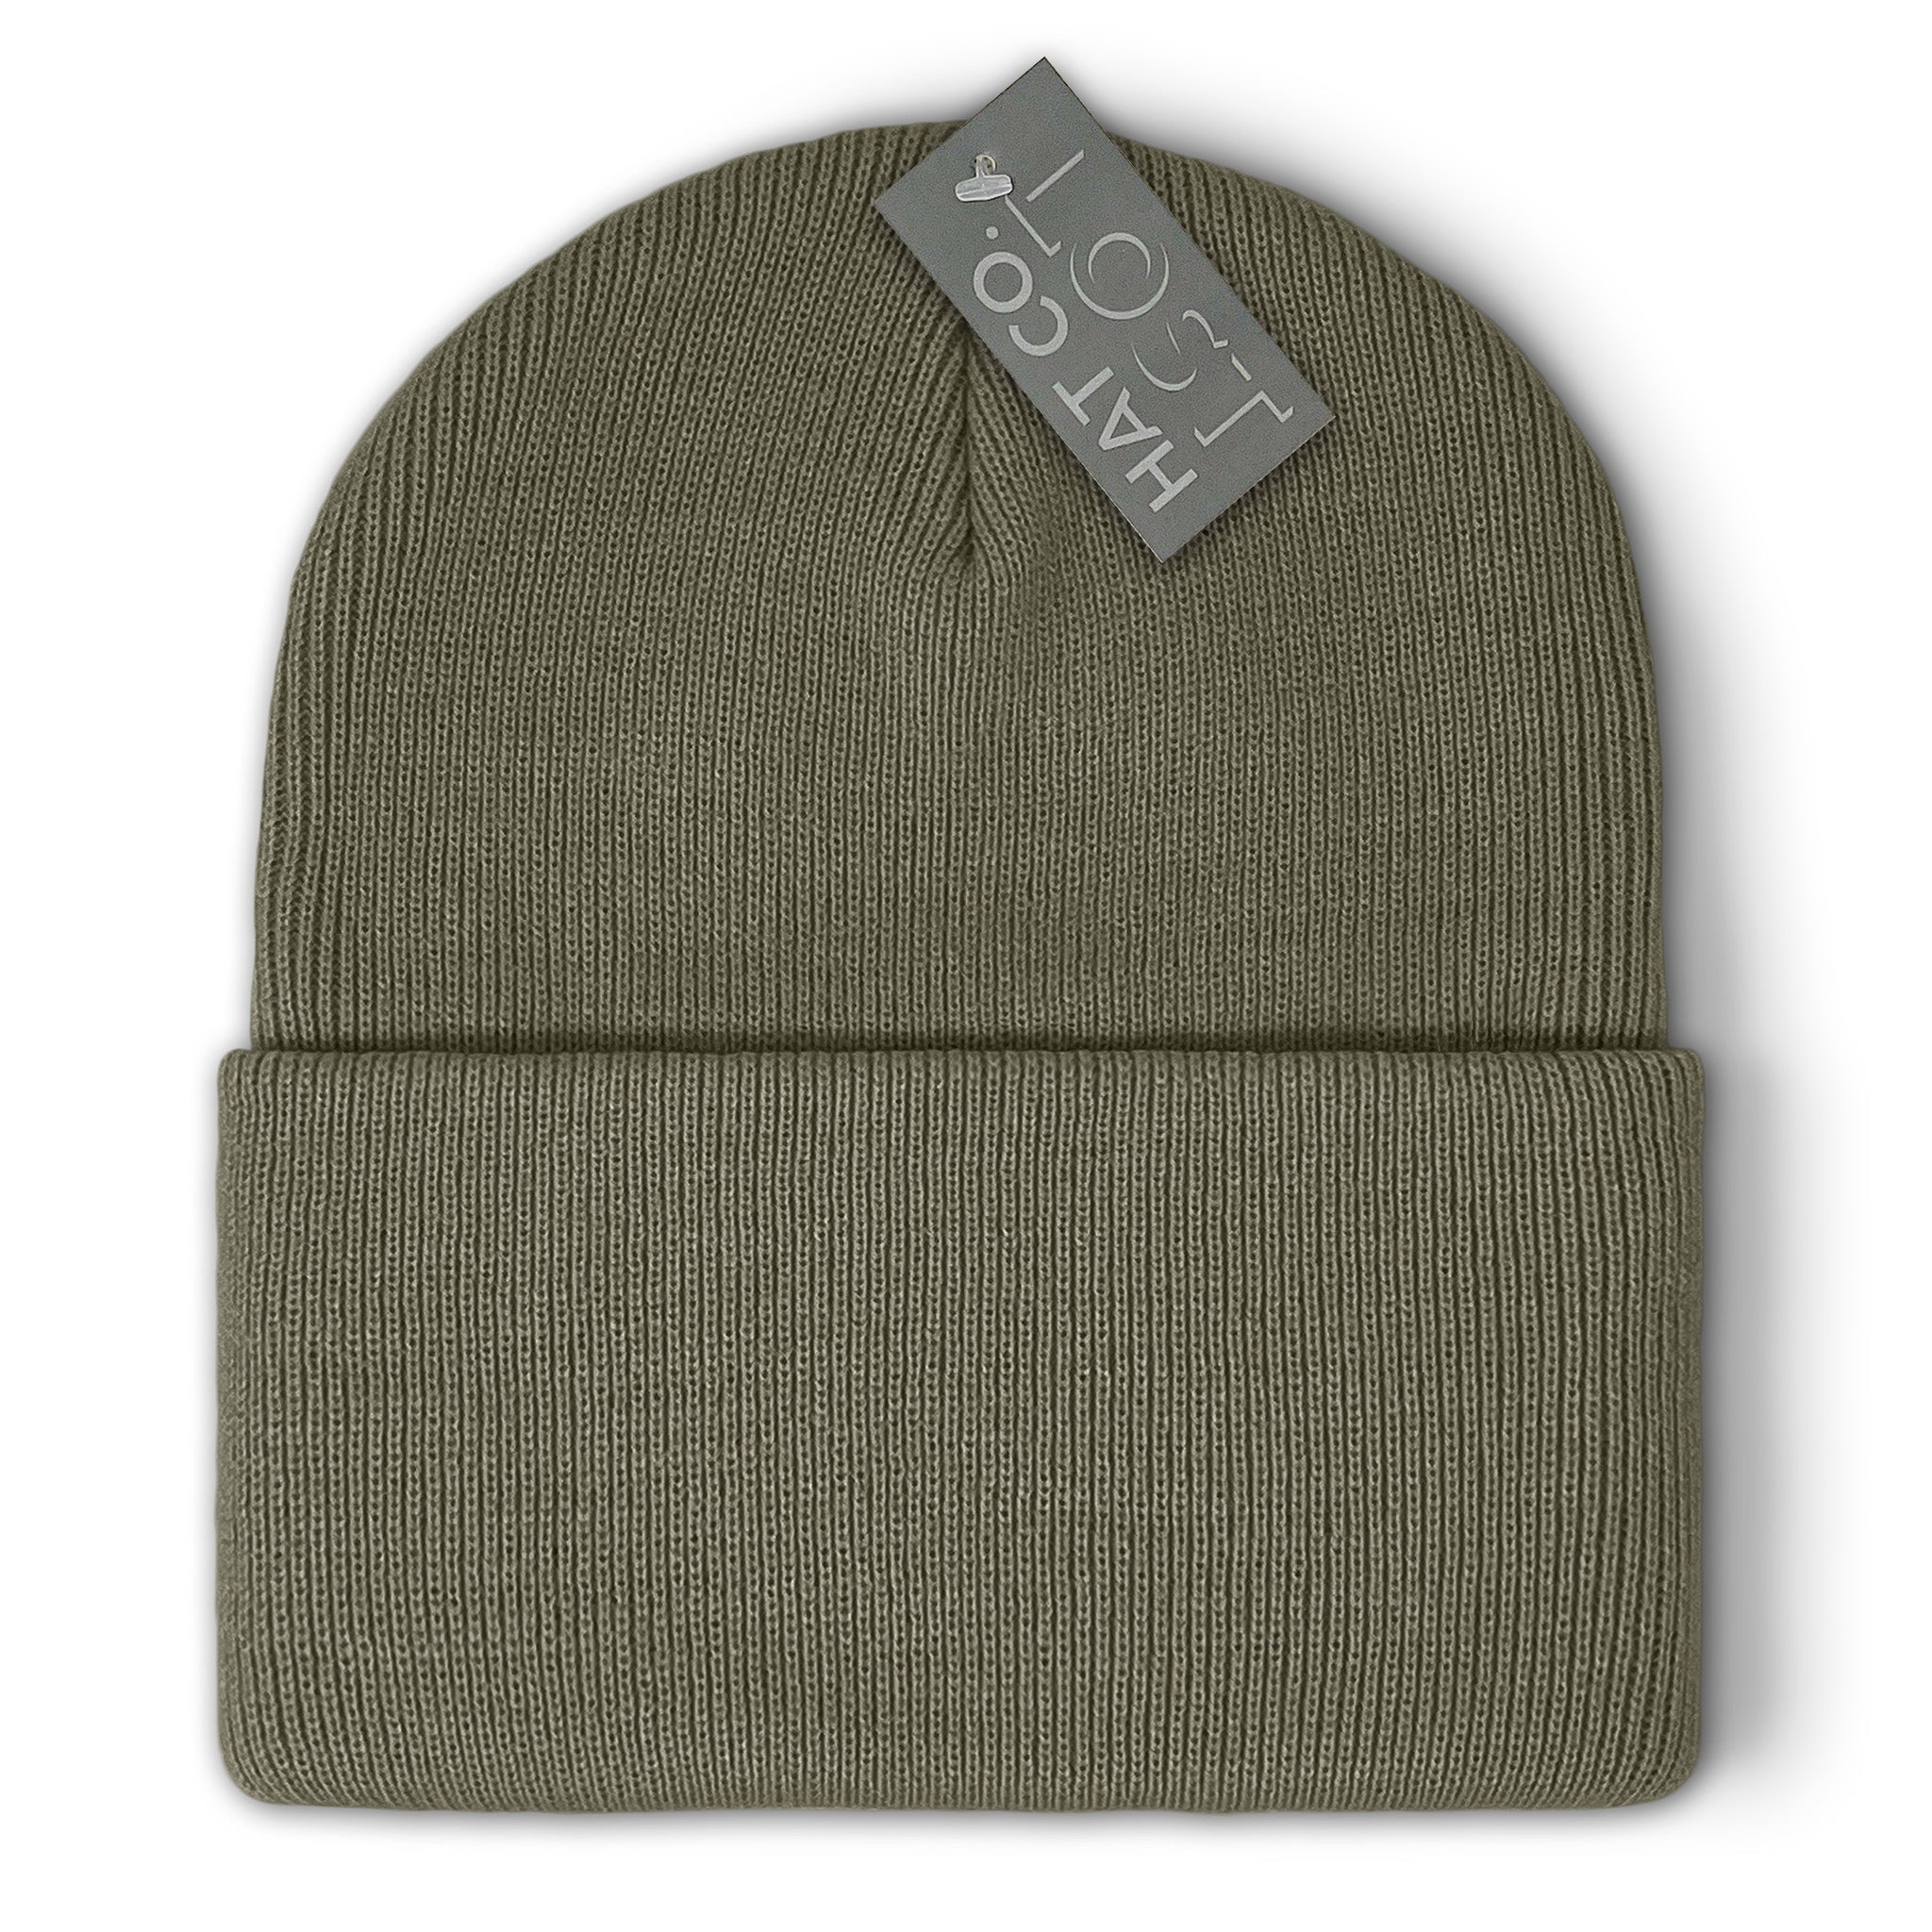 Gator Cold Front Beanie